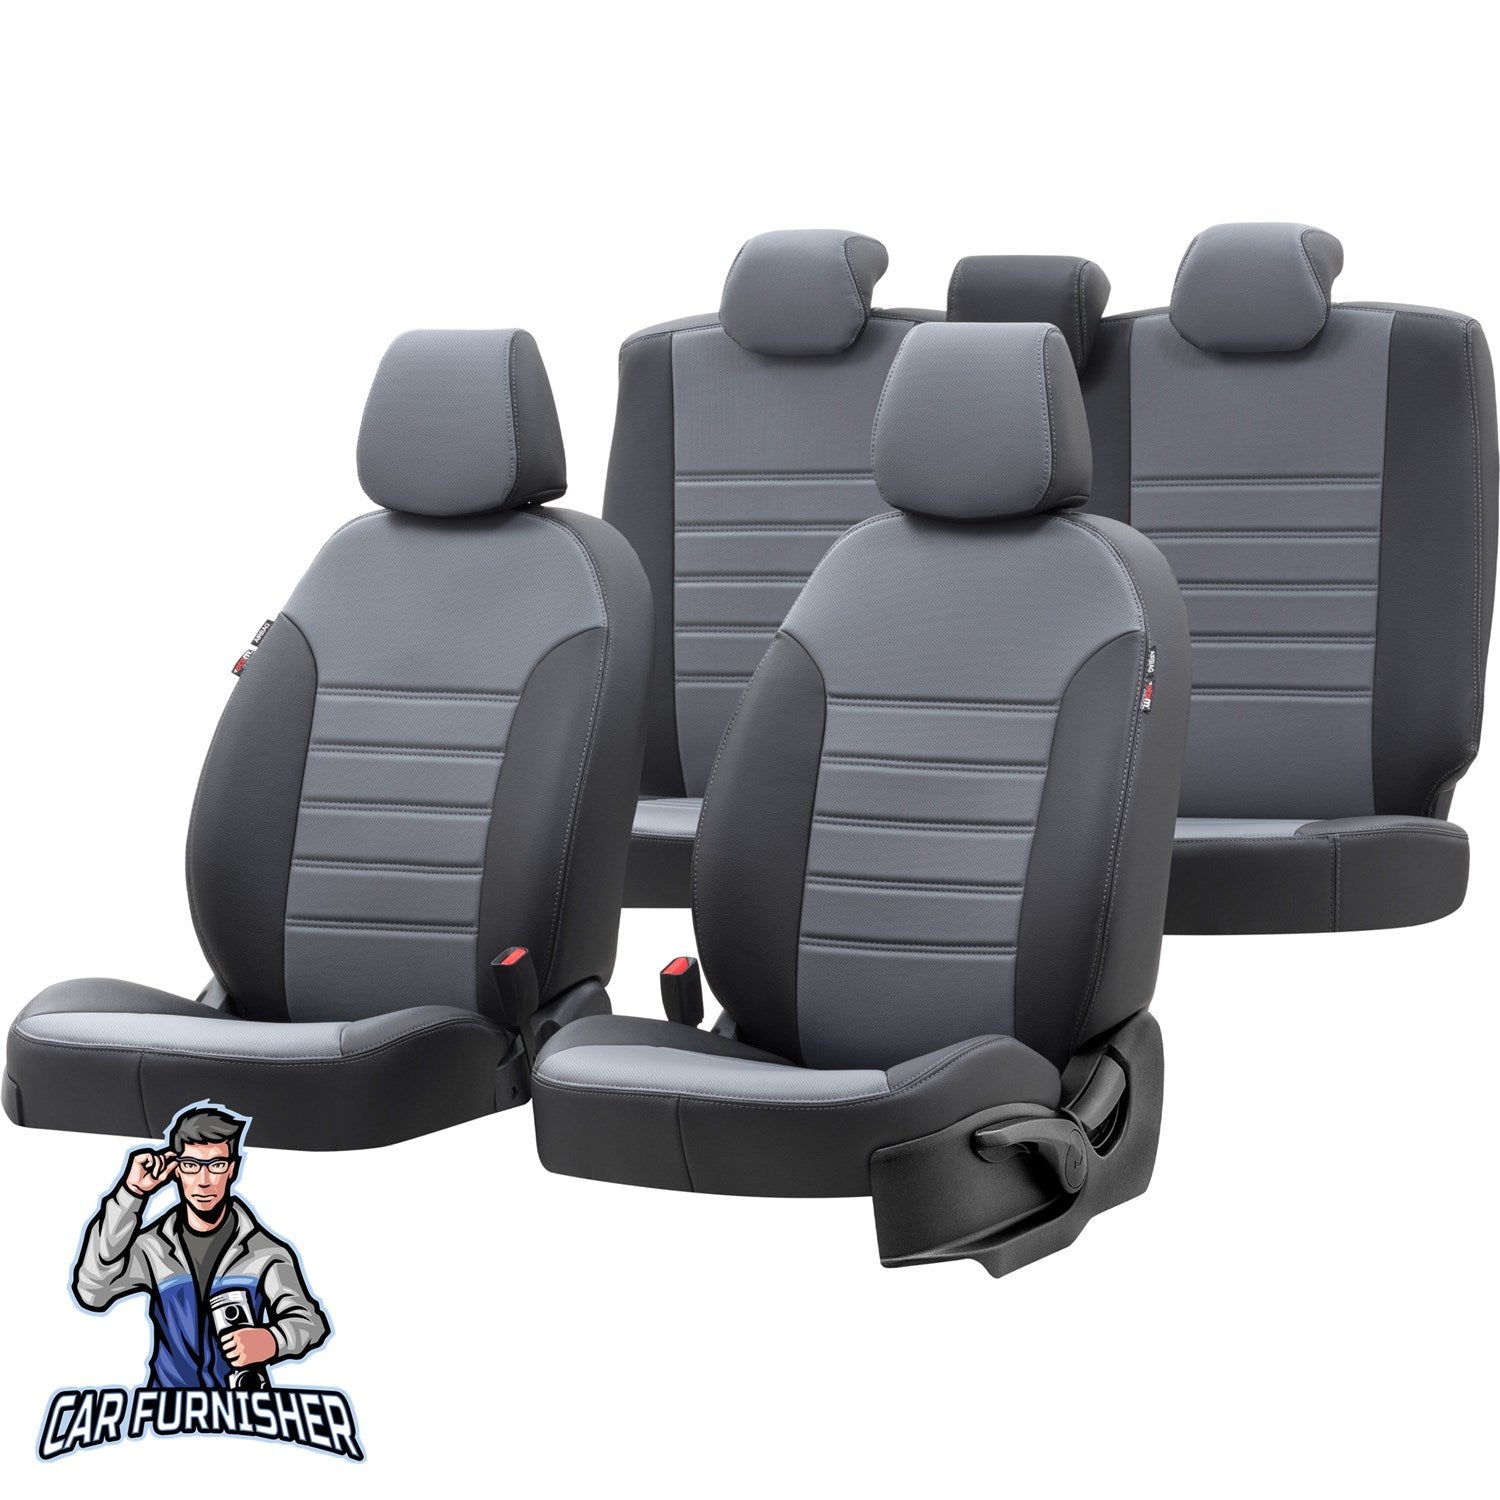 Landrover Freelander Car Seat Covers 1998-2012 Istanbul Design Smoked Black Leather